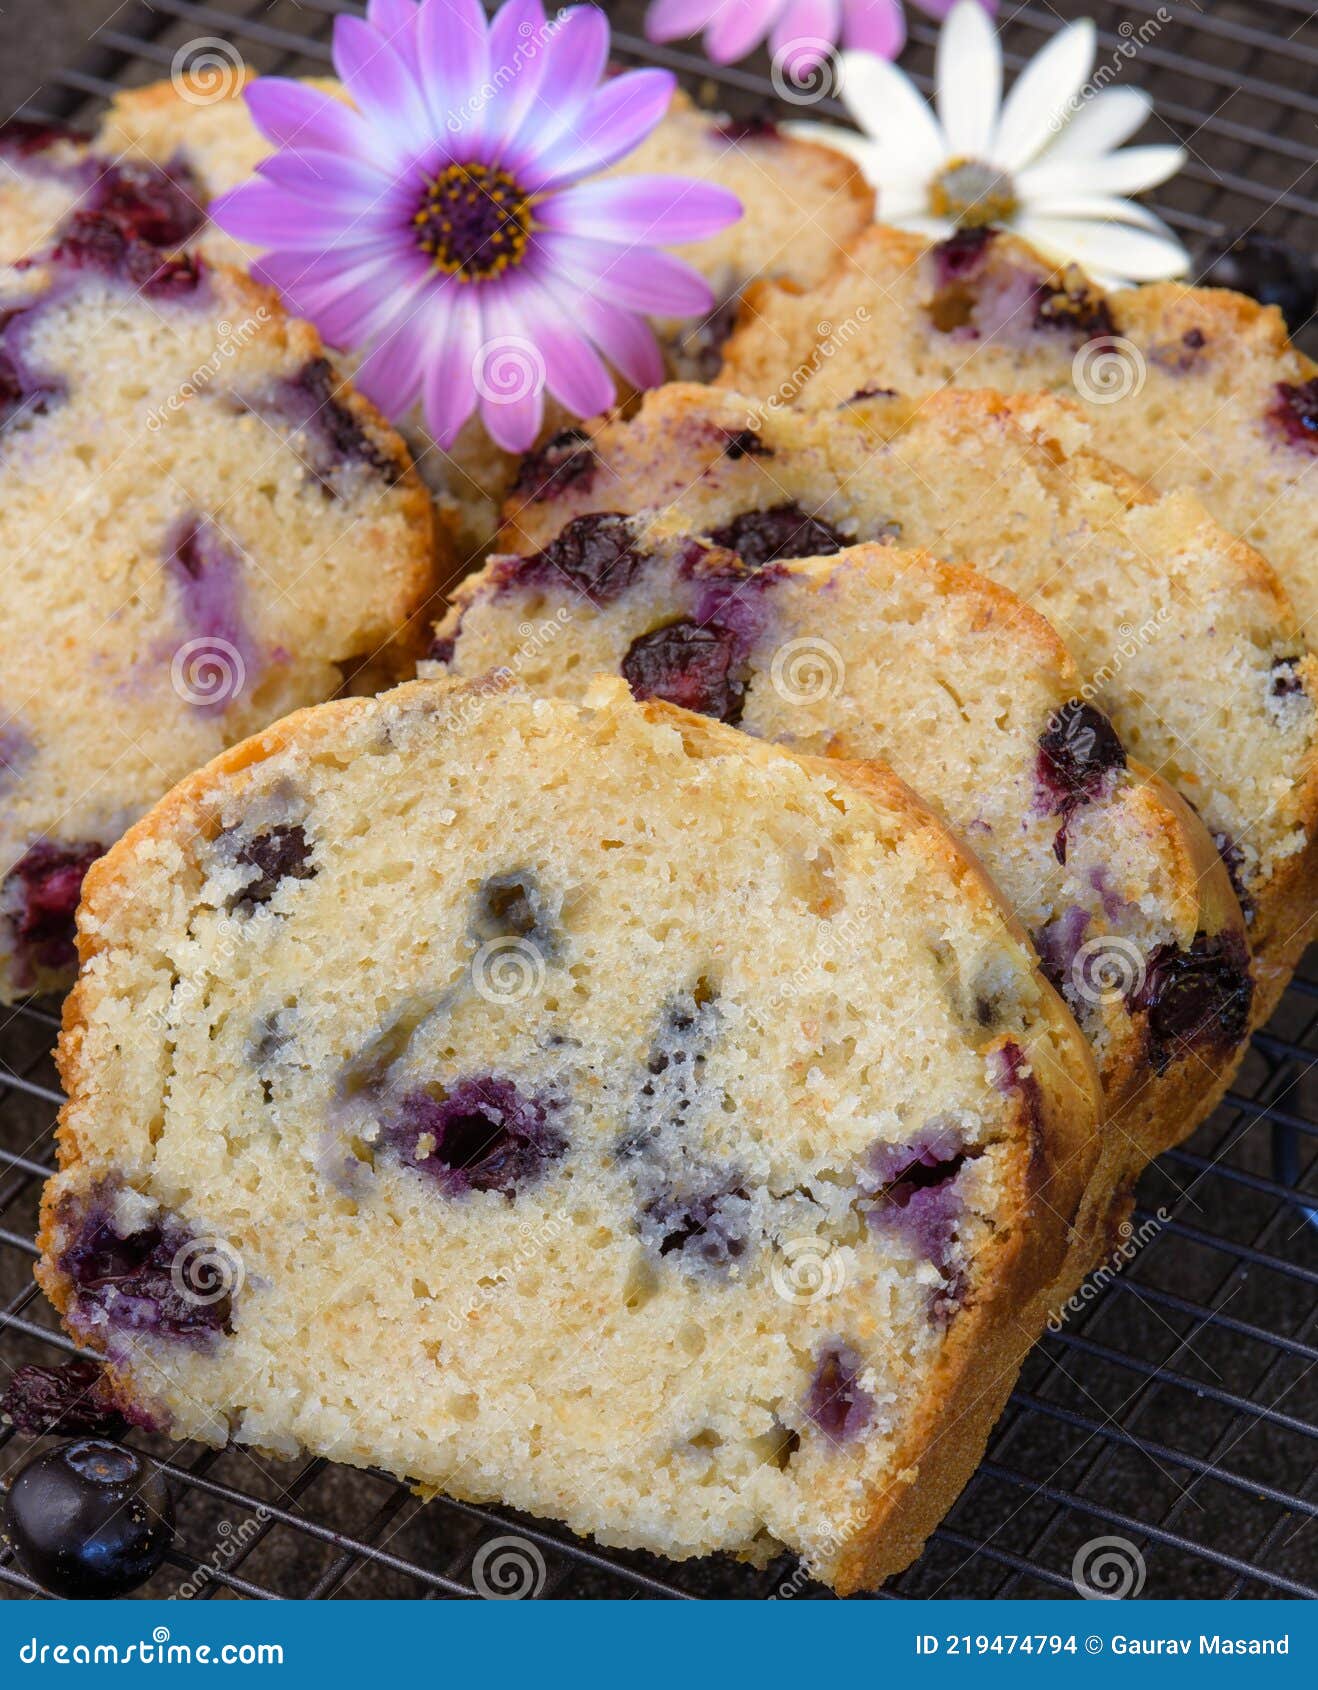 soft moist blueberry cake on a grill